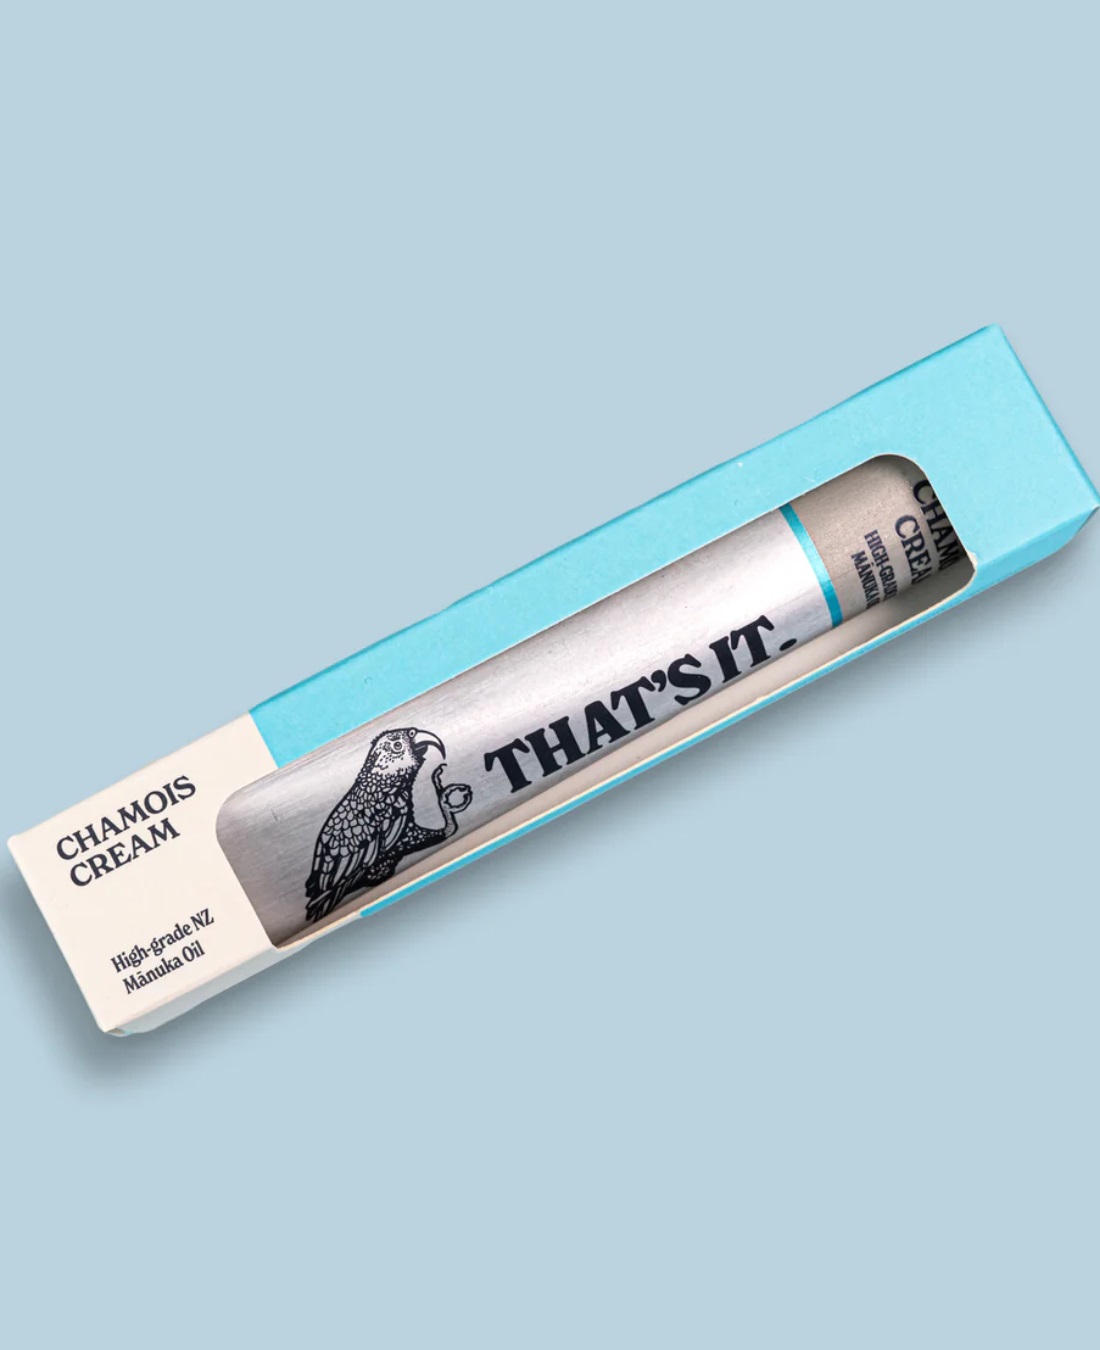 That's it chamois cream in silver aluminium tube in box on blue background